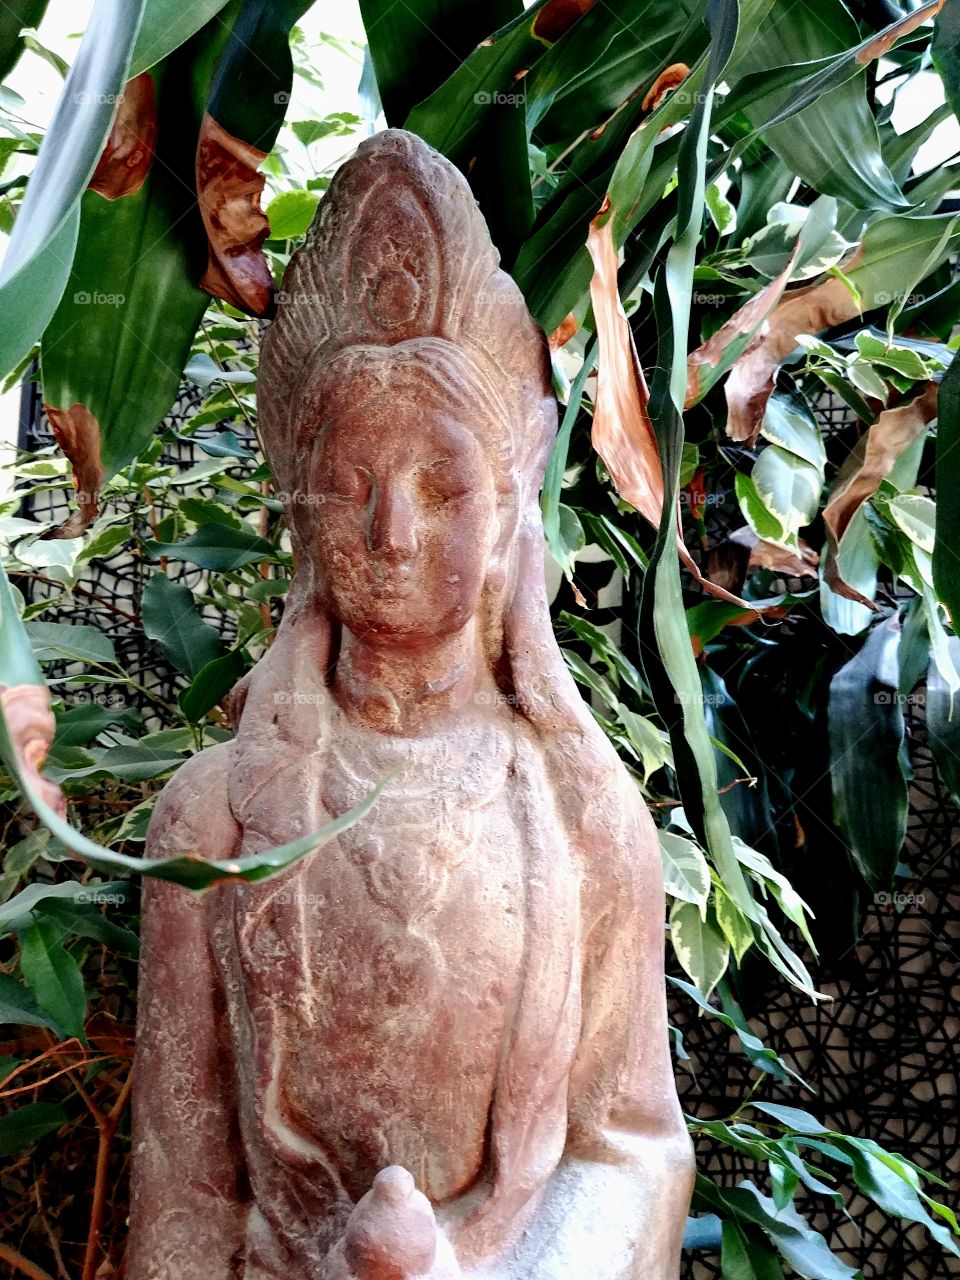 This statue is intended to give people a sense of peace and calmness. I love the surrounding foliage.